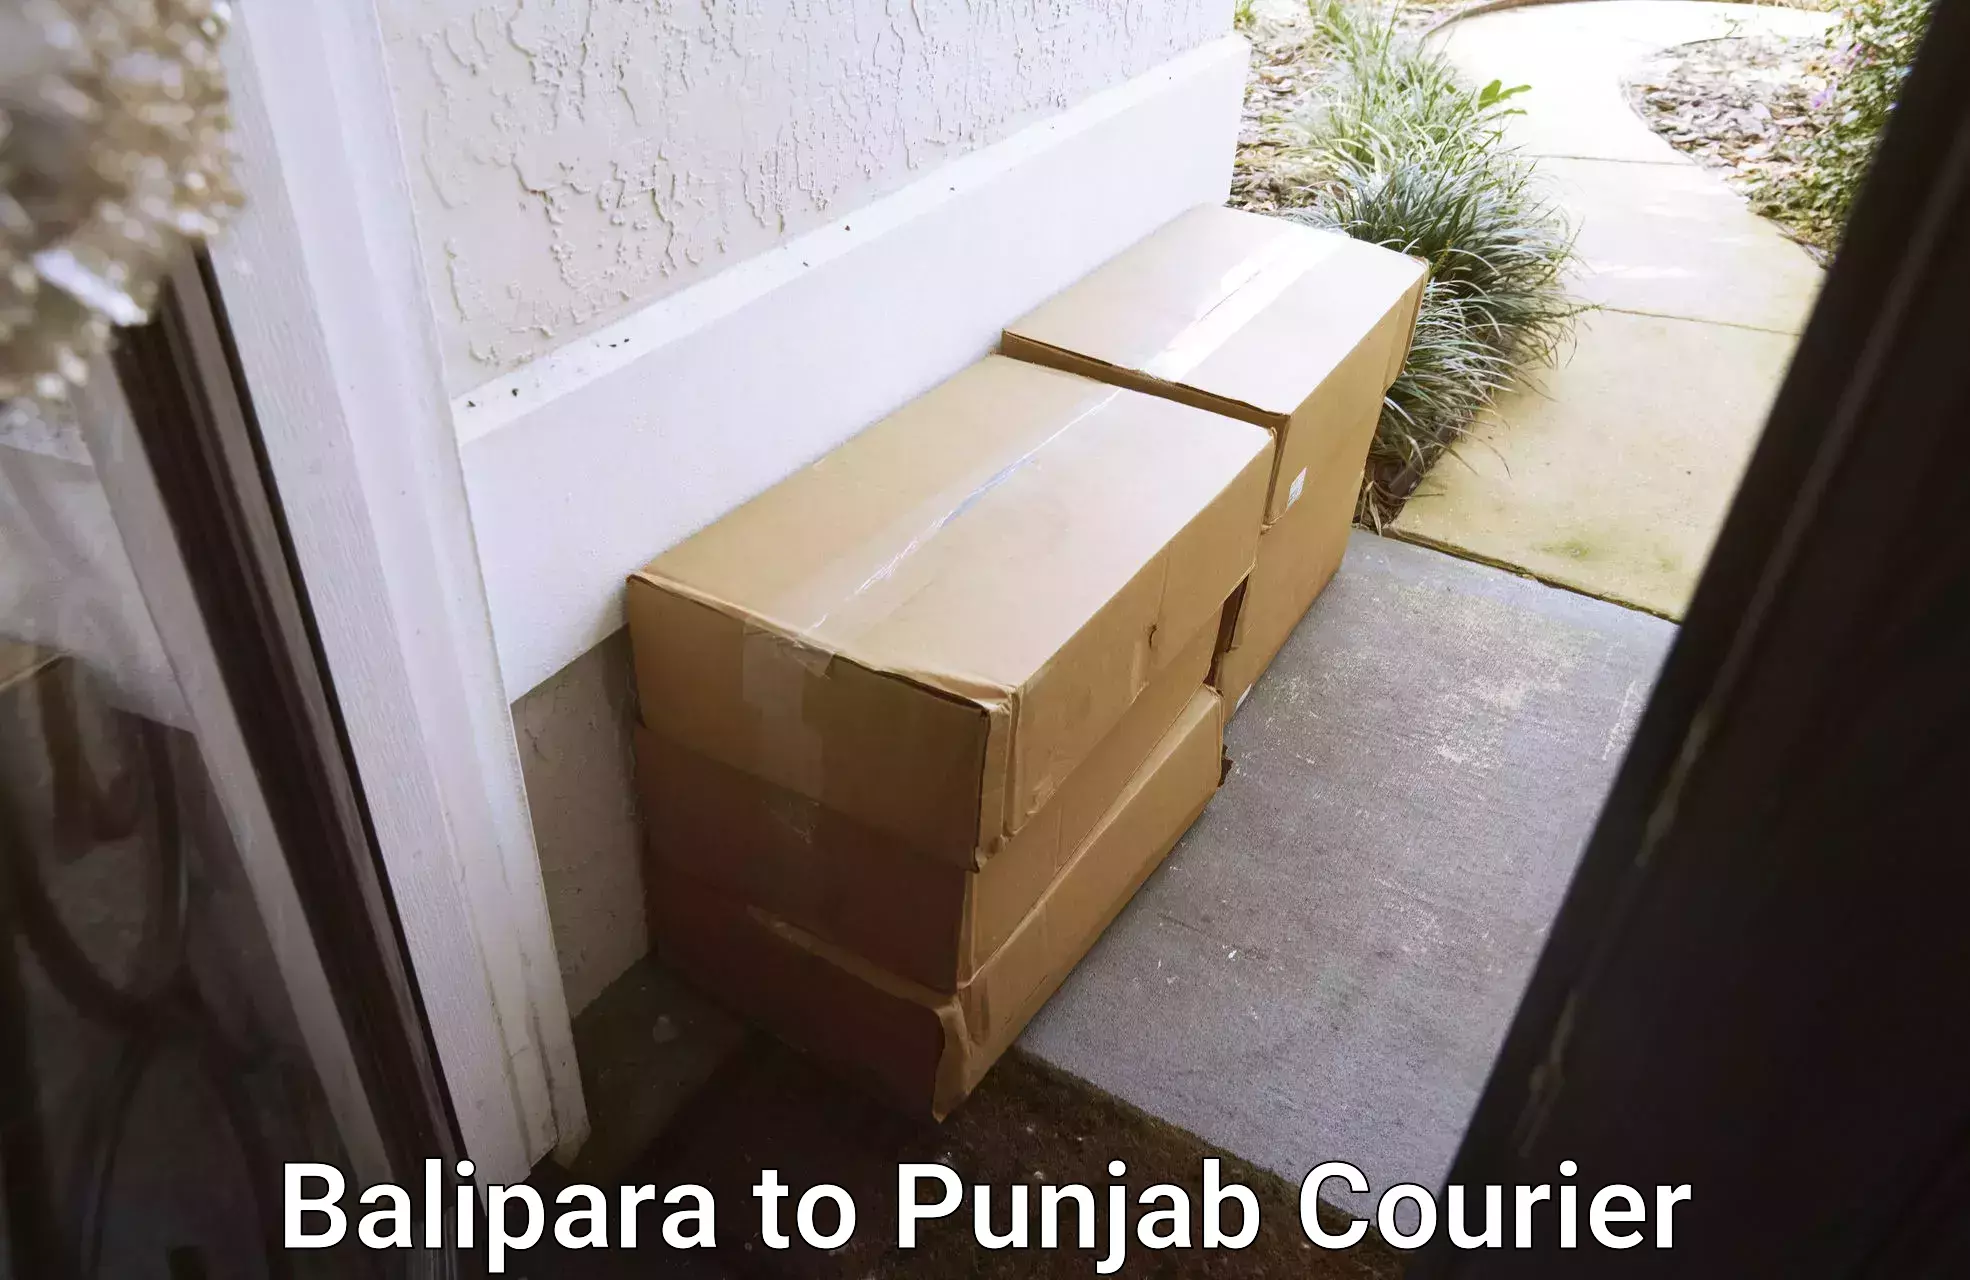 Multi-carrier shipping Balipara to Sultanpur Lodhi